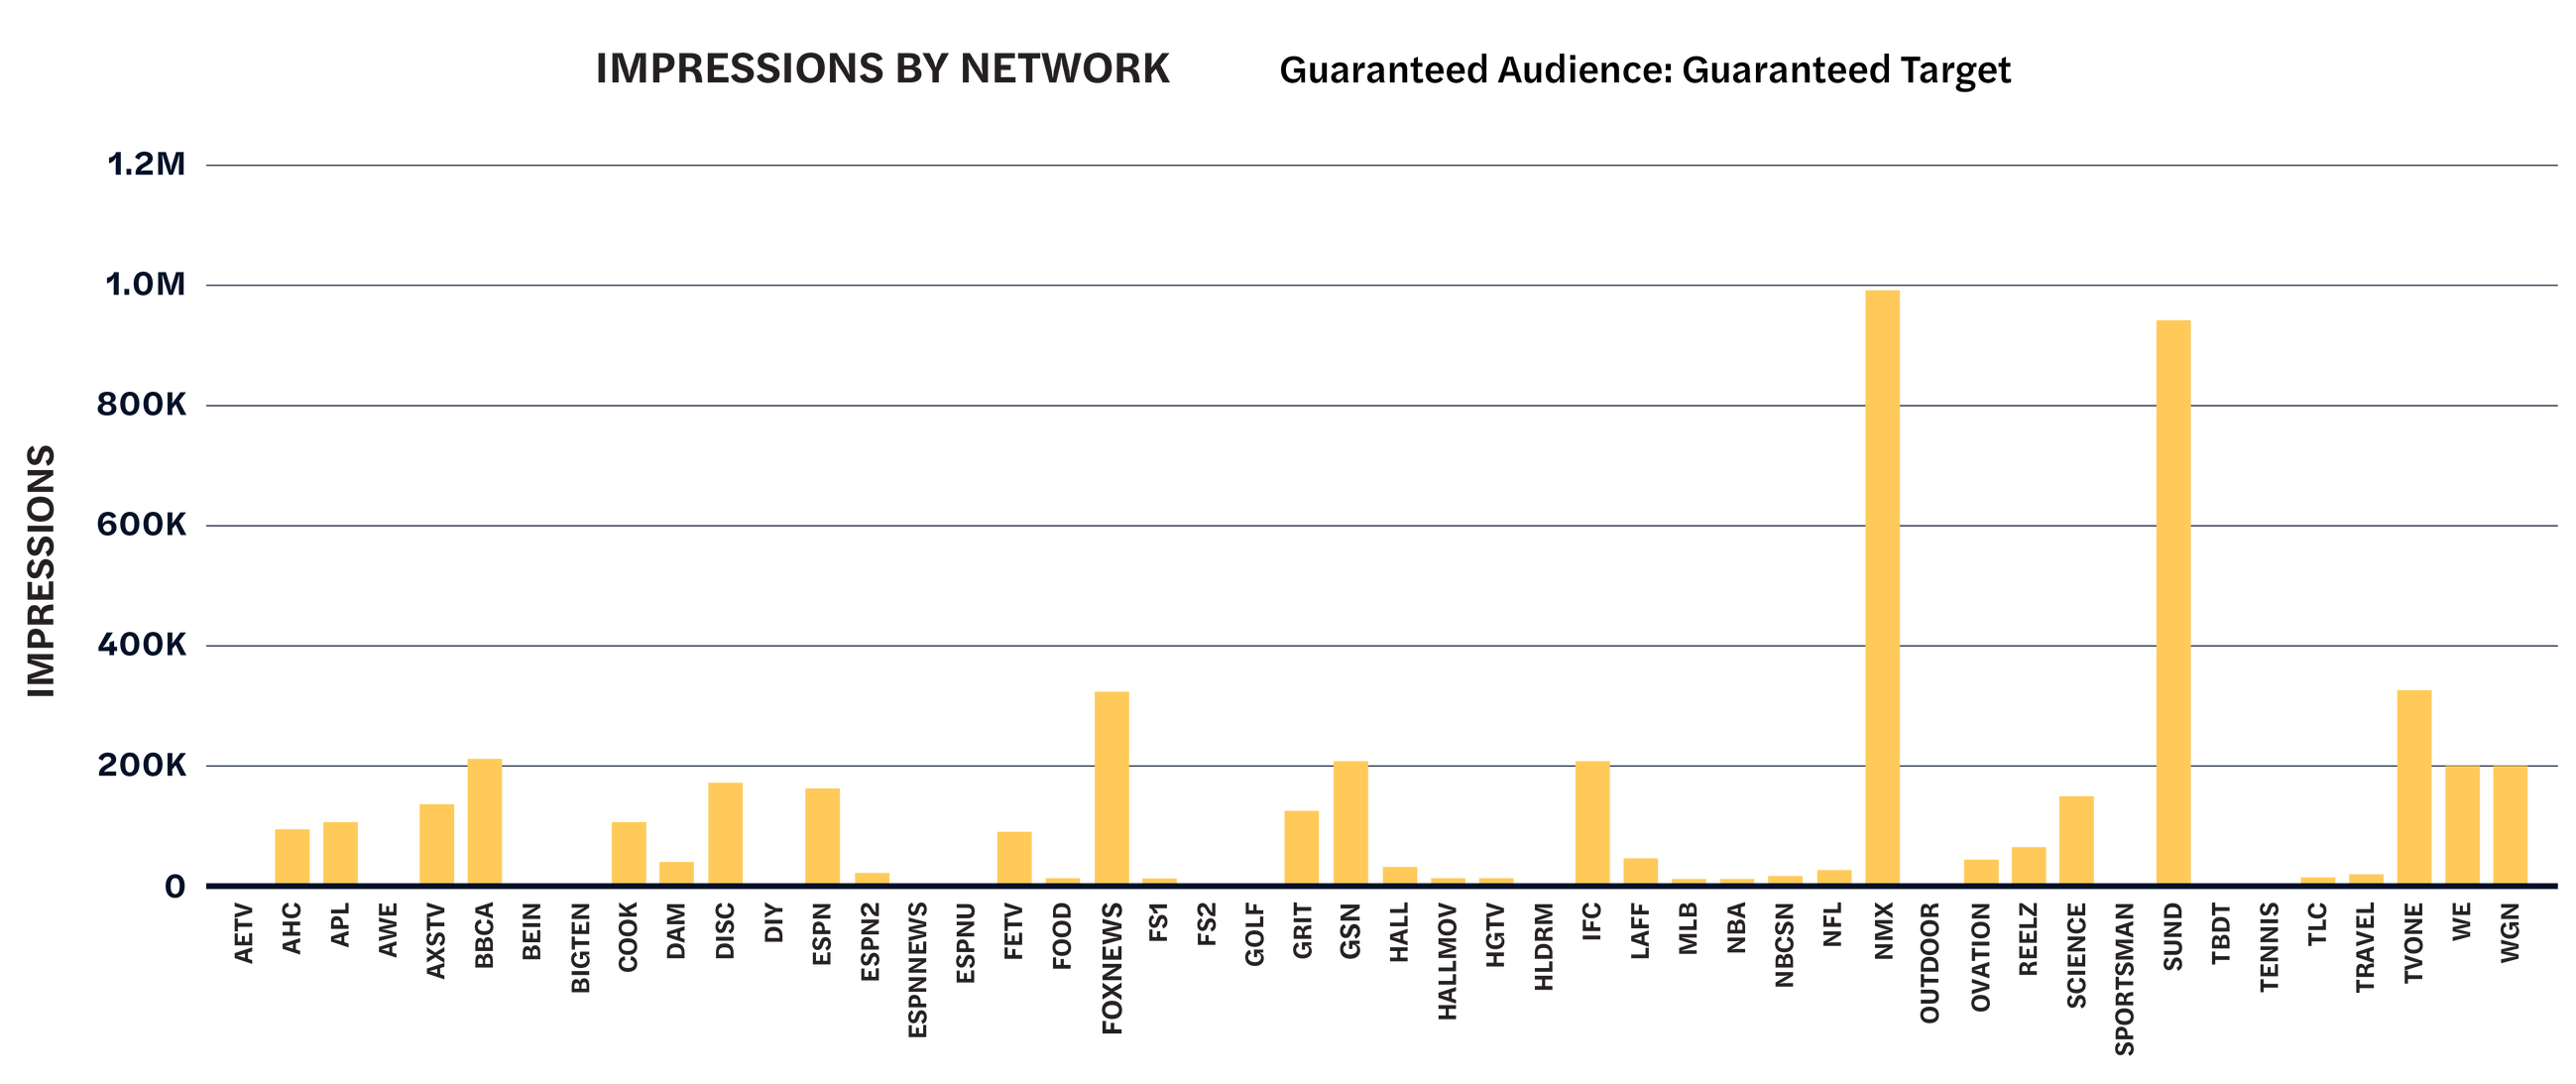 TV advertising case study bar chart showing impression delivery by network.